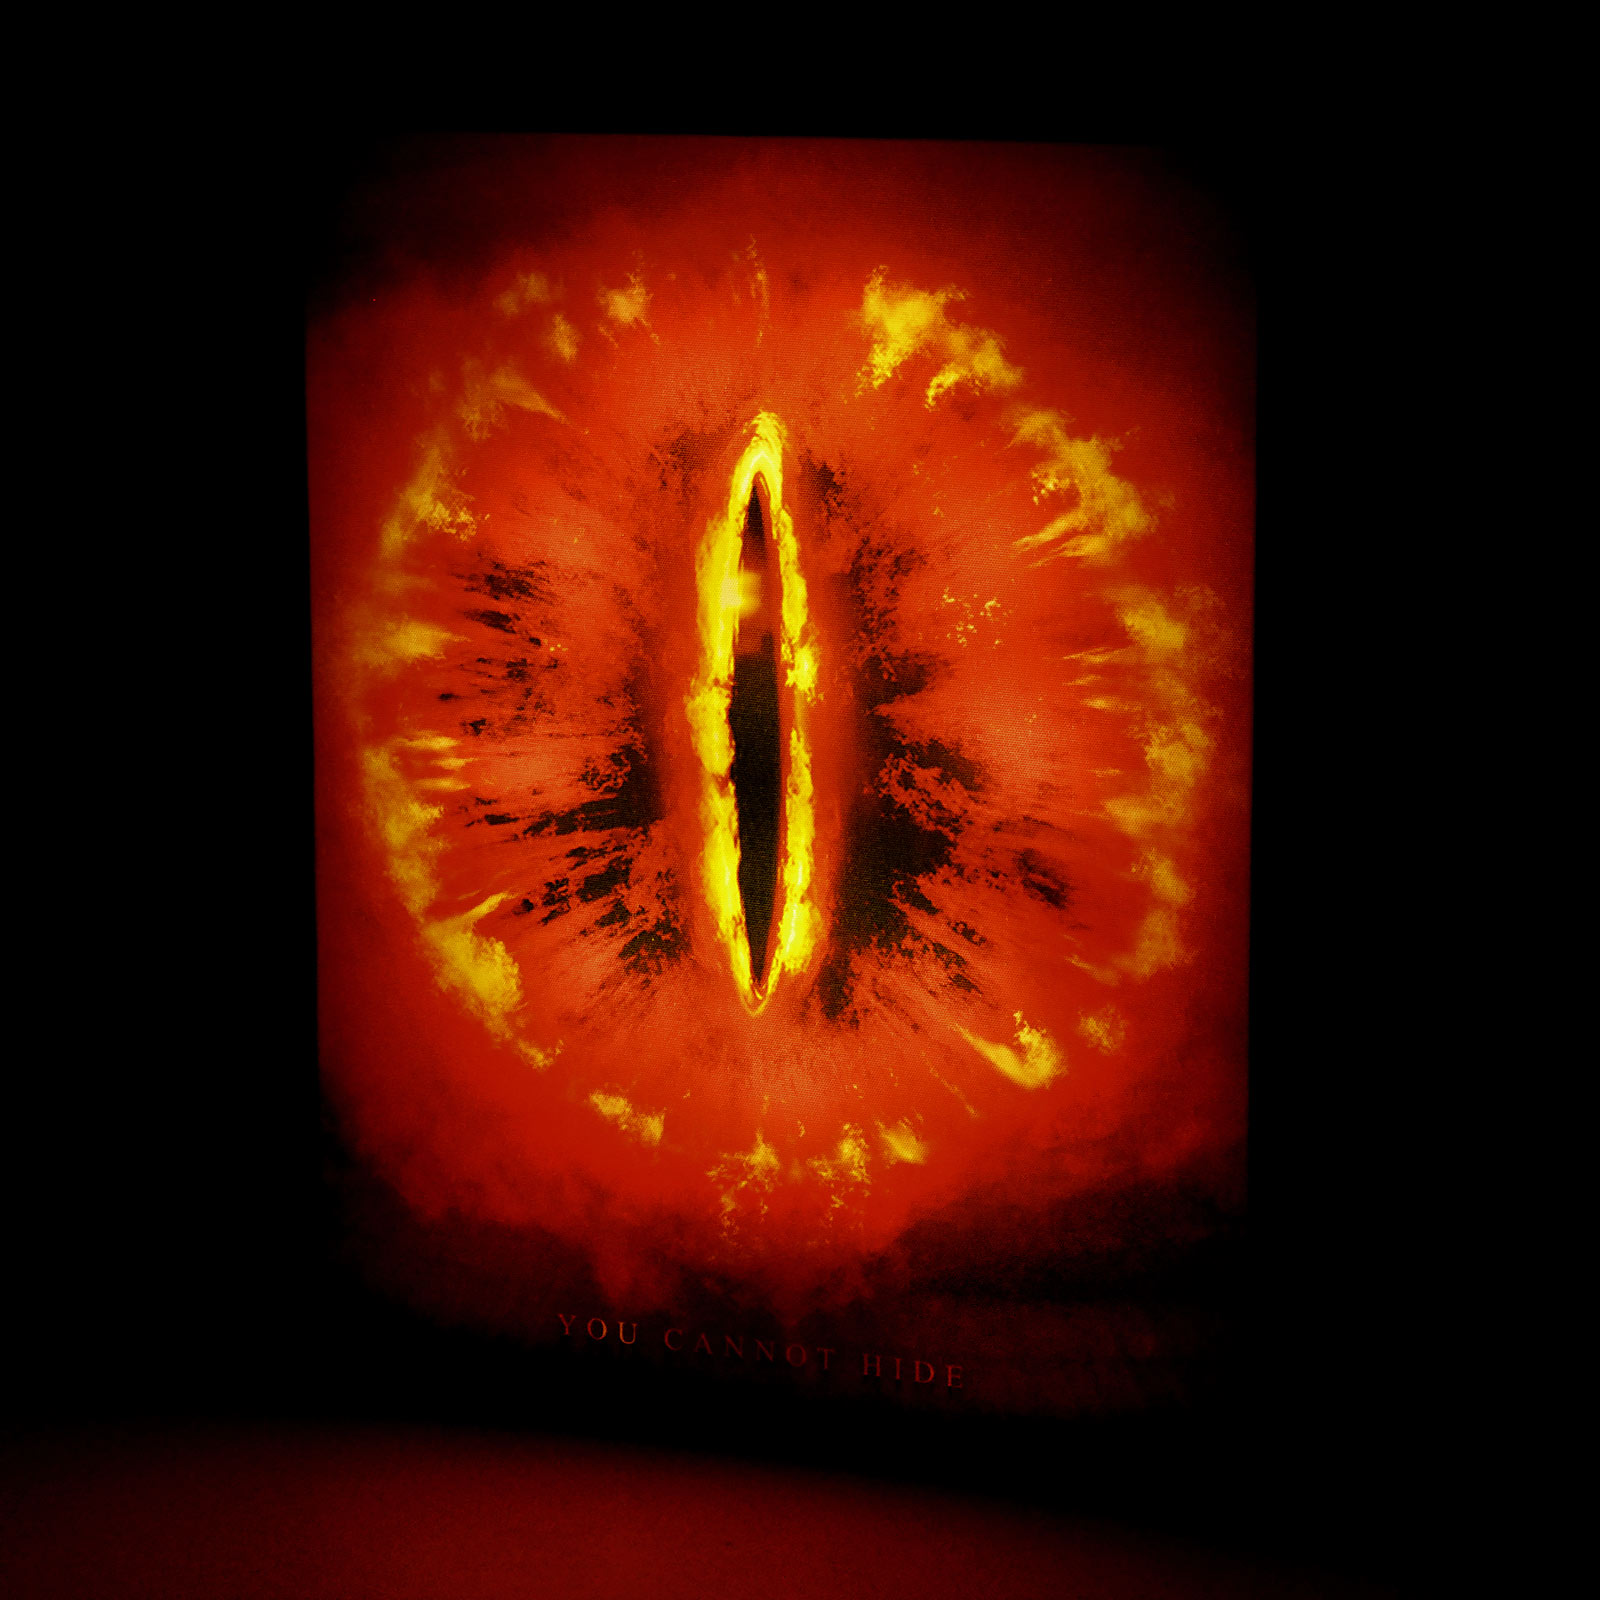 Lord of the Rings - Sauron's Eye Wall Picture with Light